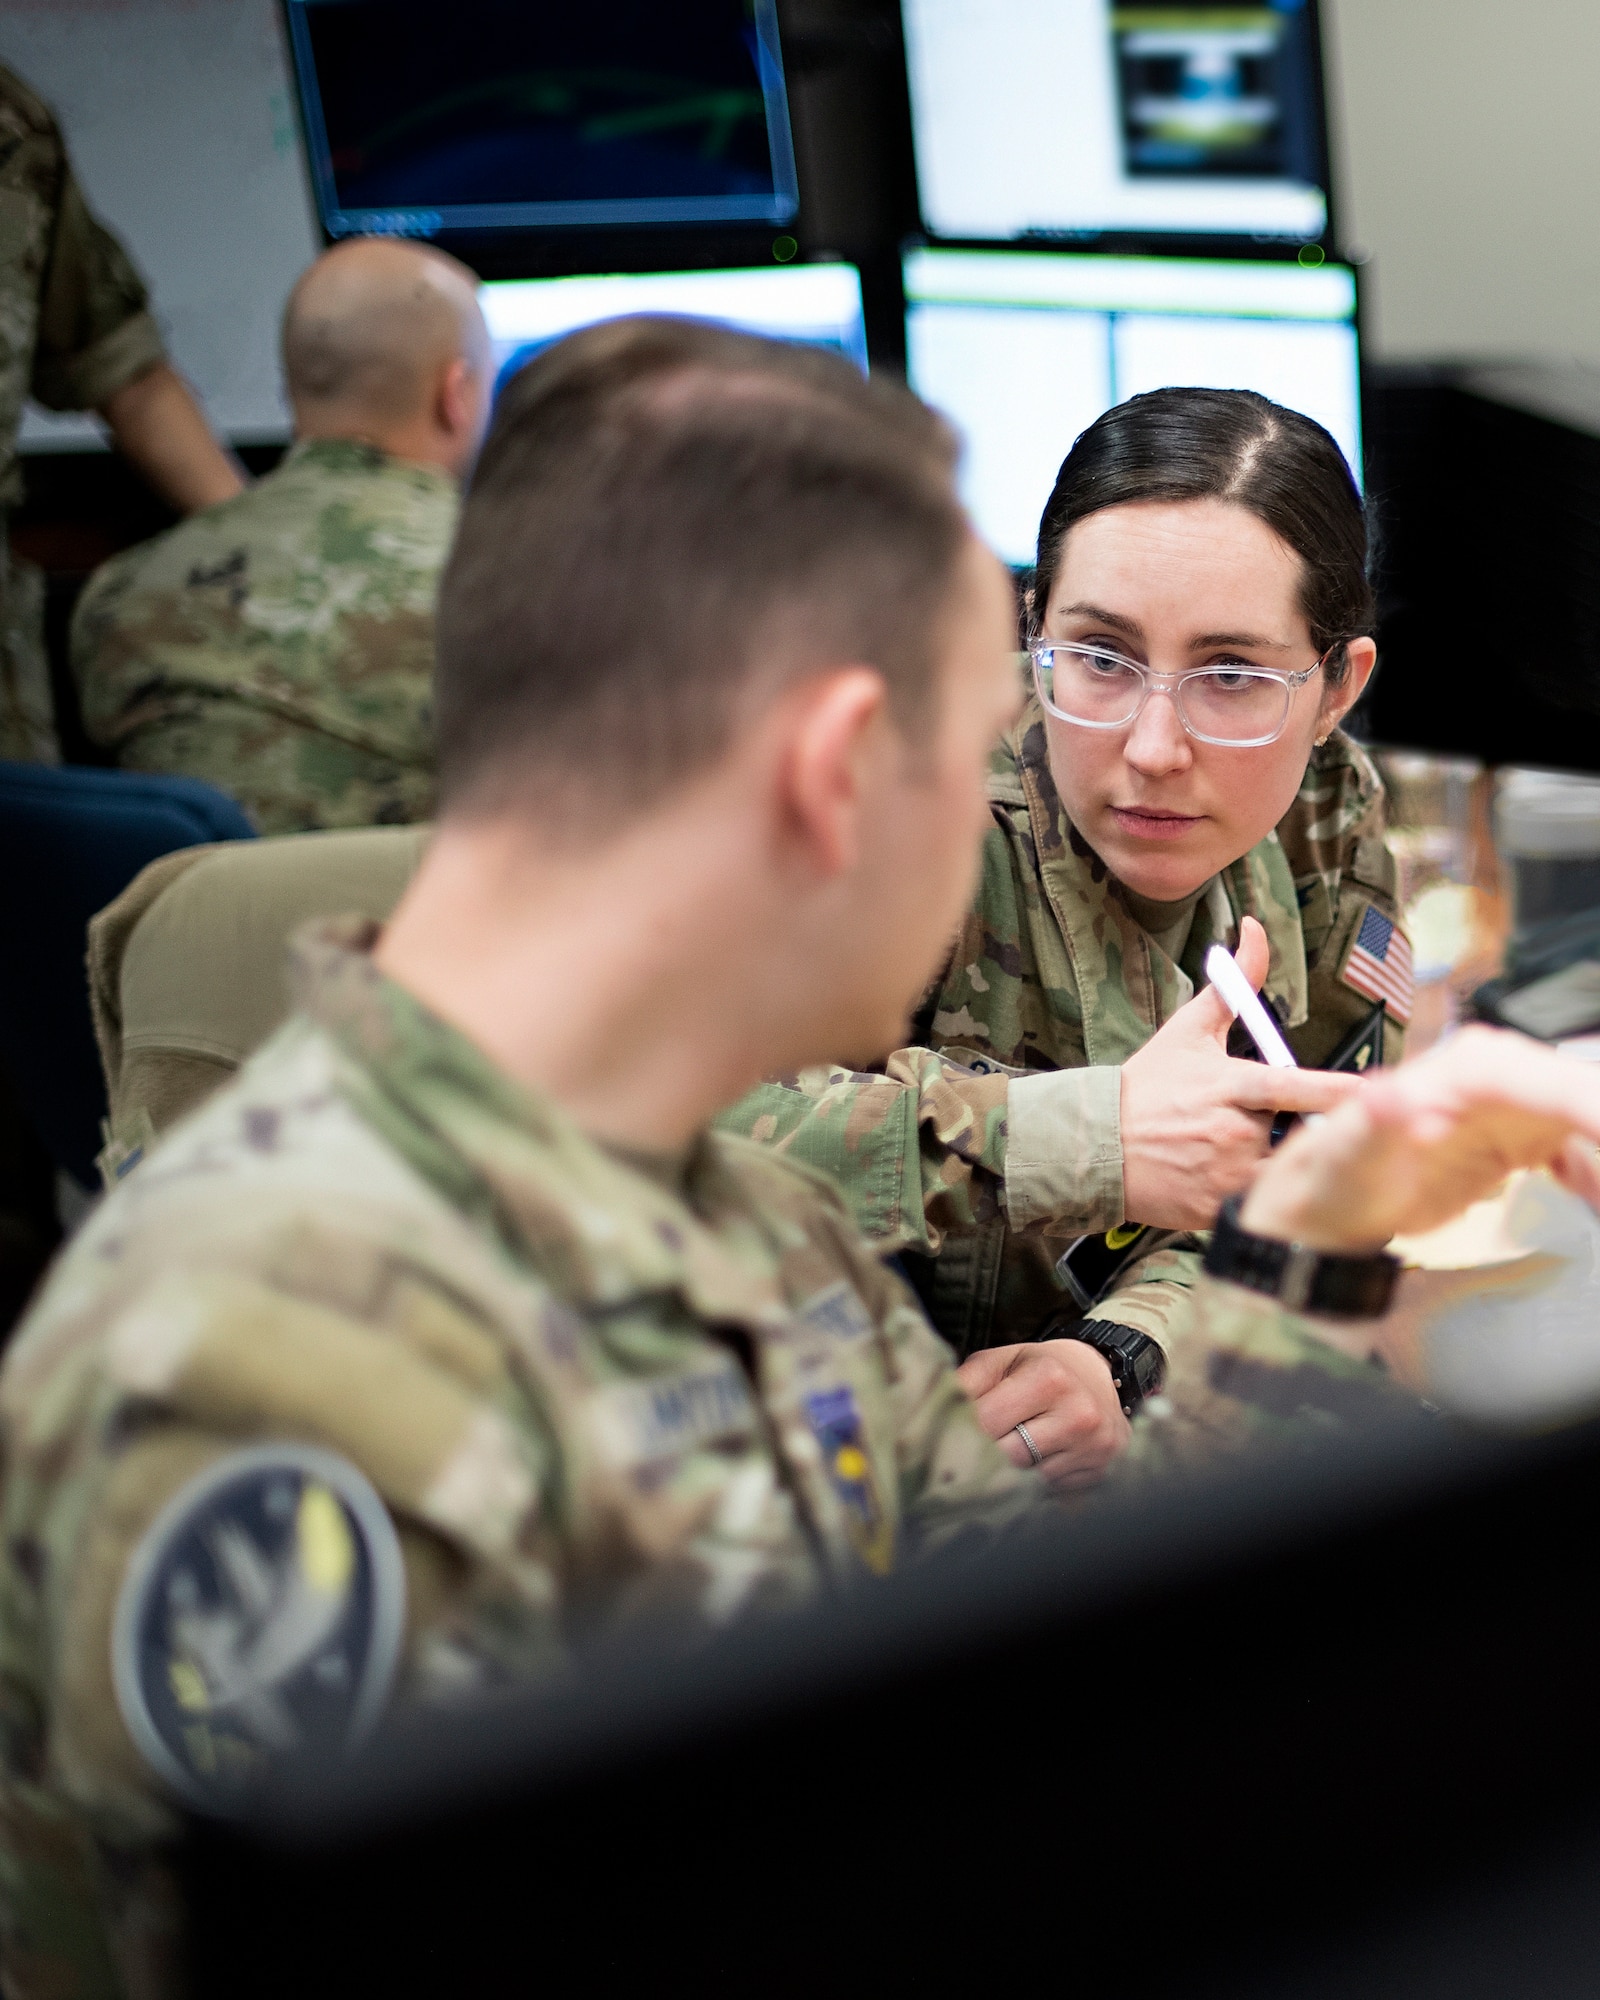 U.S. Space Force 1st Lt. Colleen O’Hara, 6th Space Warning Squadron, collaborates with USSF Sgt. Benjamin Clanton, 7th Space Warning Squadron, on a new combat tactic that was developed during SPACE FLAG 23-1